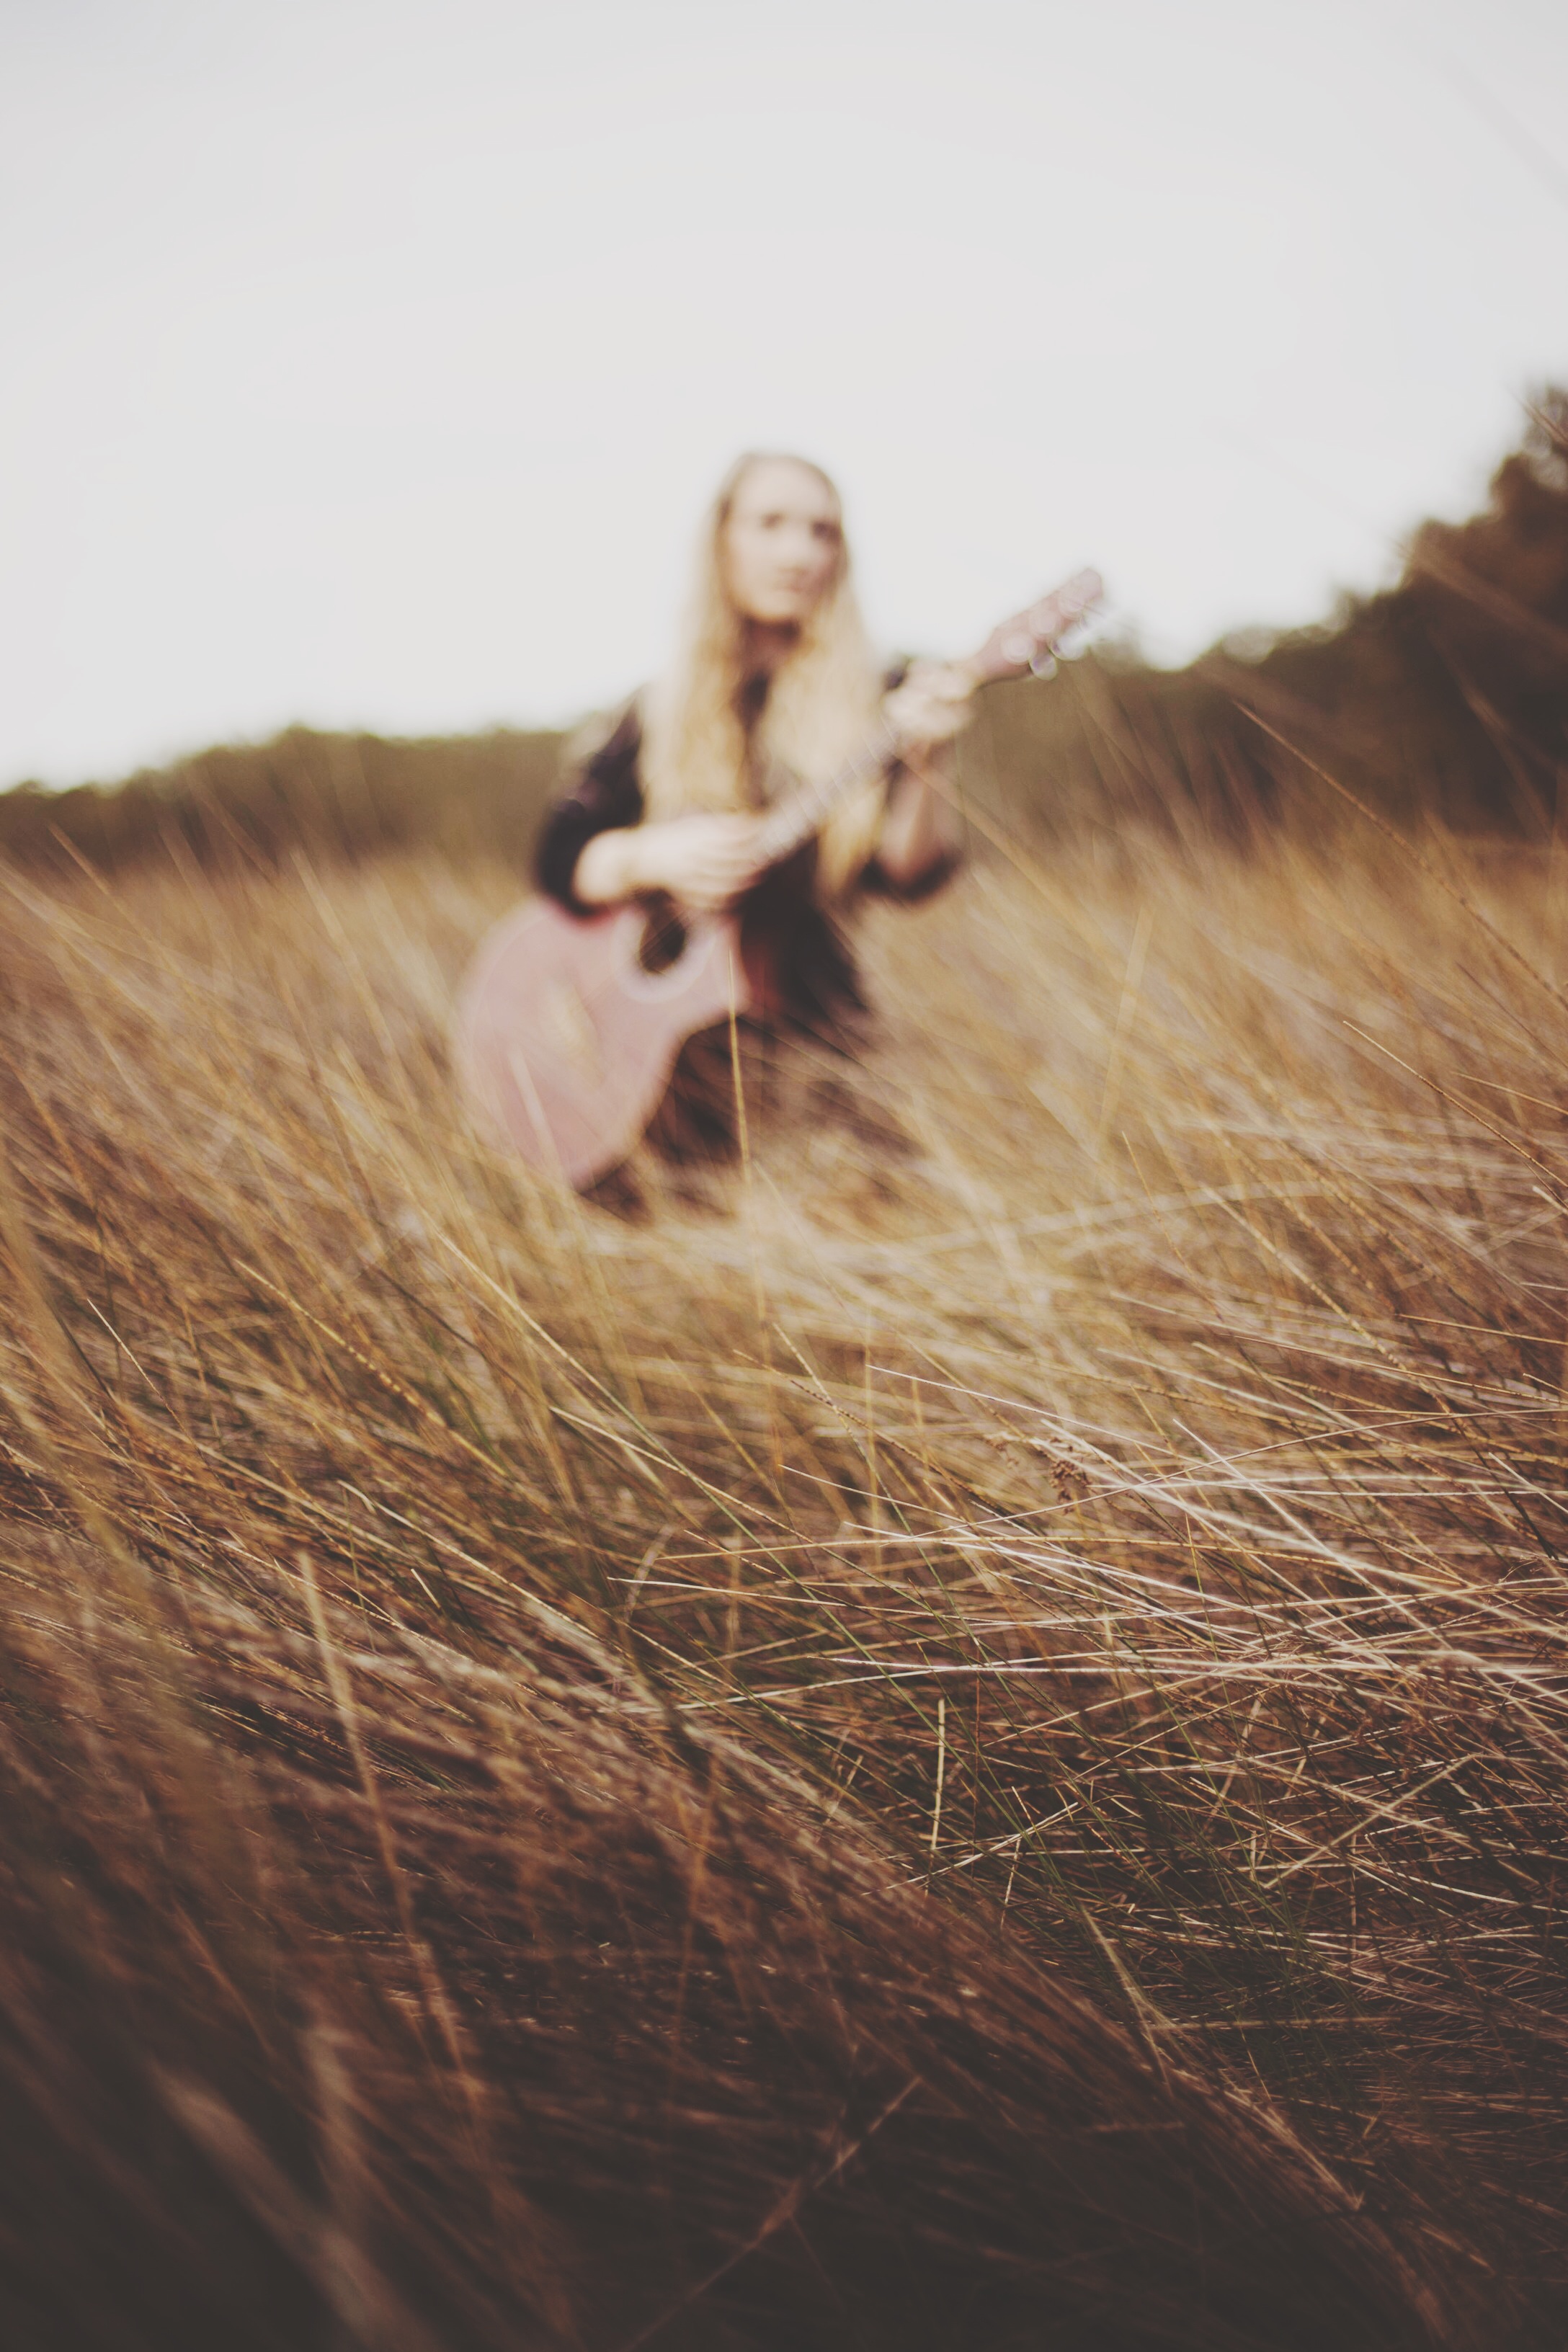 girl sitting in a field of wheat with guitar